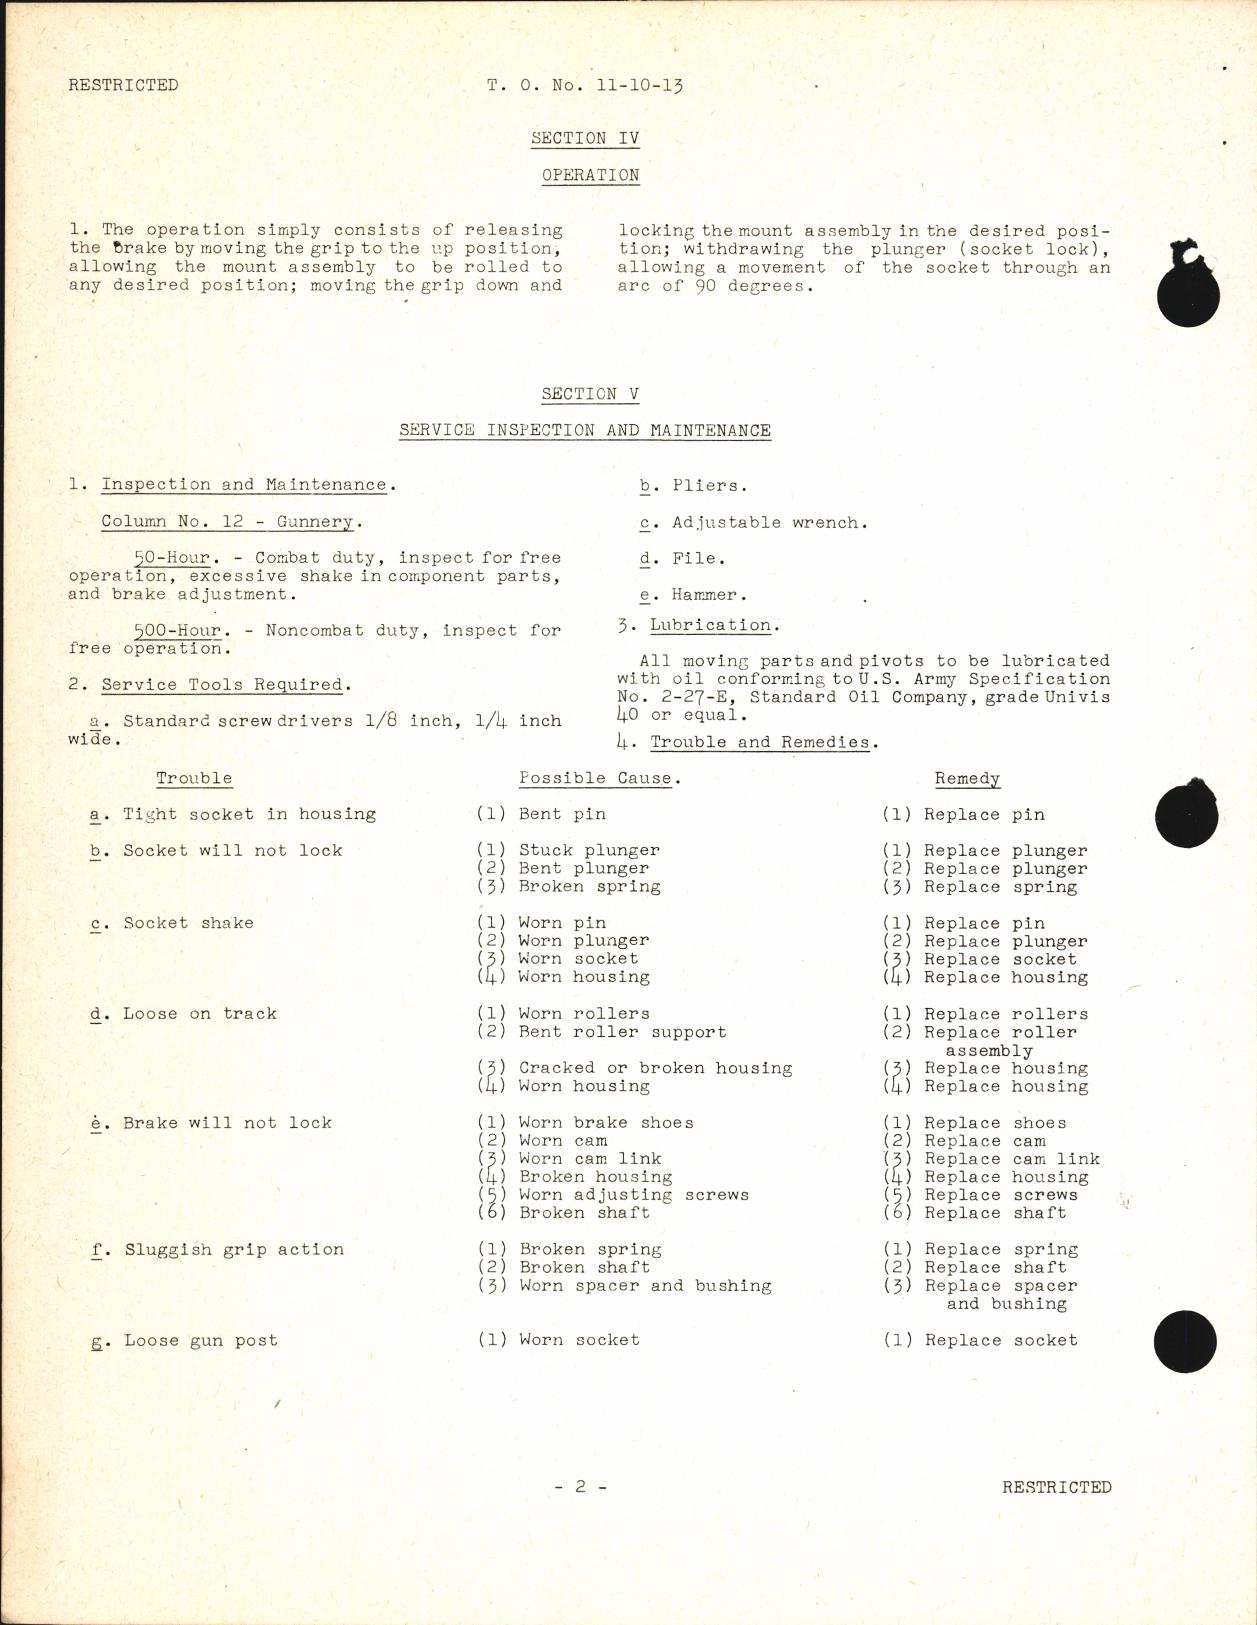 Sample page 6 from AirCorps Library document: Handbook of Instructions with Parts Catalog for Type G-5 Gun Mounts